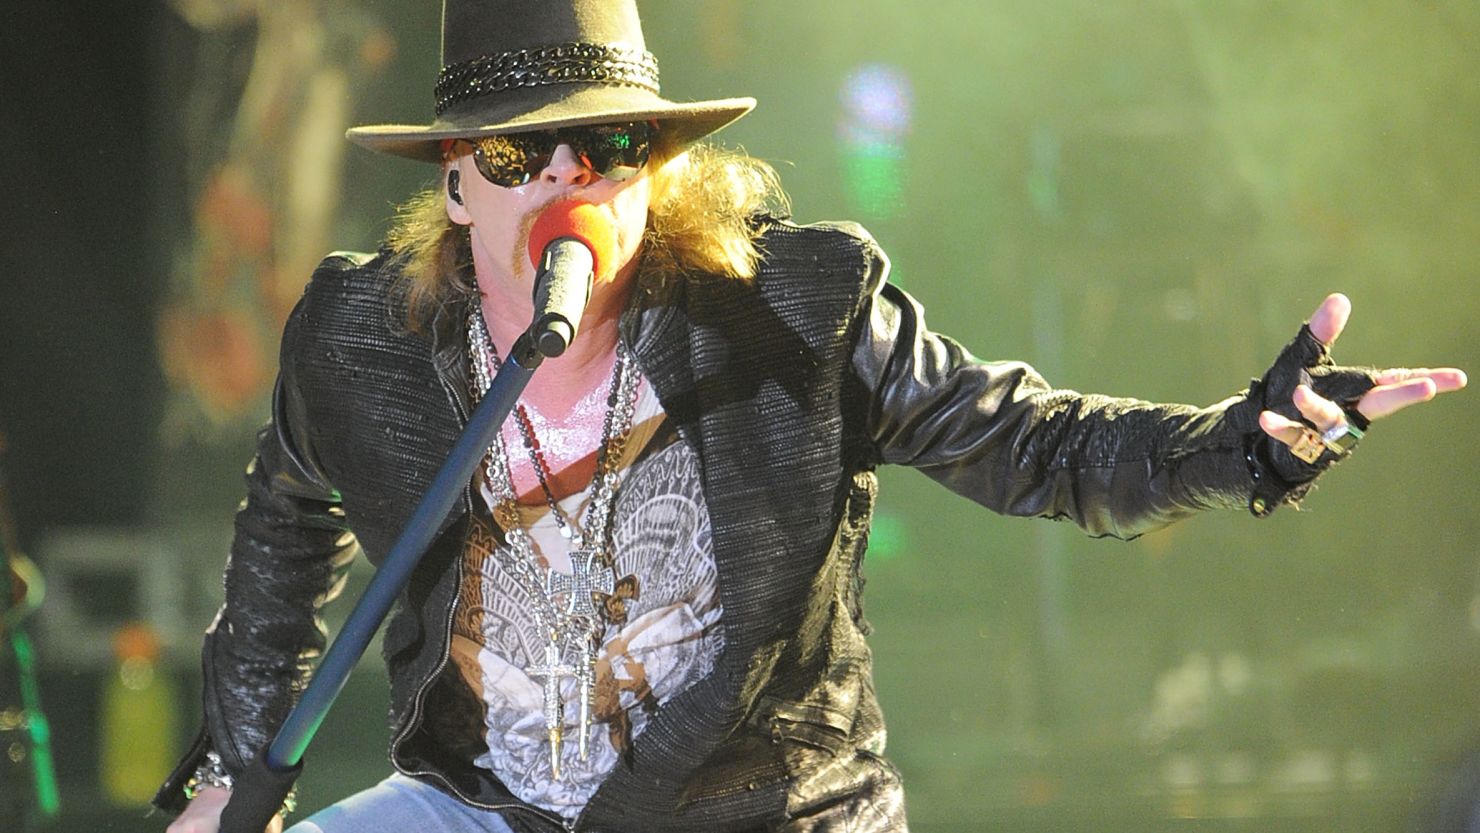 Axl Rose of Guns N' Roses performs at the Hollywood Palladium on March 9, 2012 in Hollywood, California. 